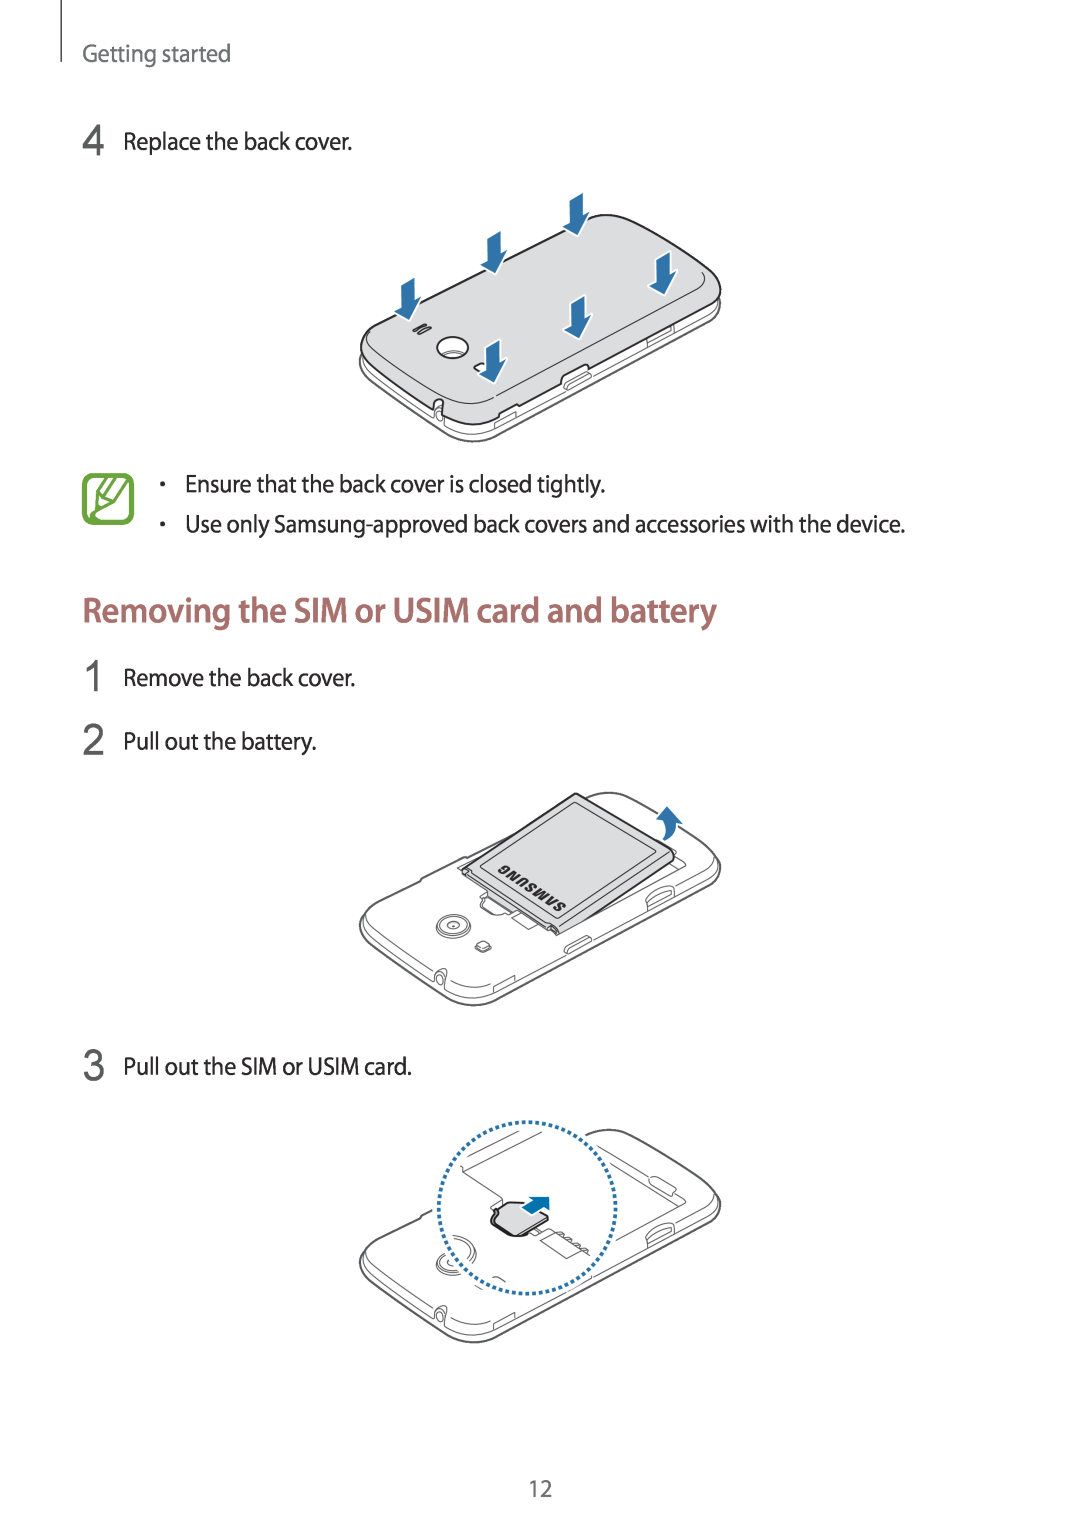 Samsung SM-G357FZAZOPT manual Removing the SIM or USIM card and battery, Getting started, Pull out the SIM or USIM card 